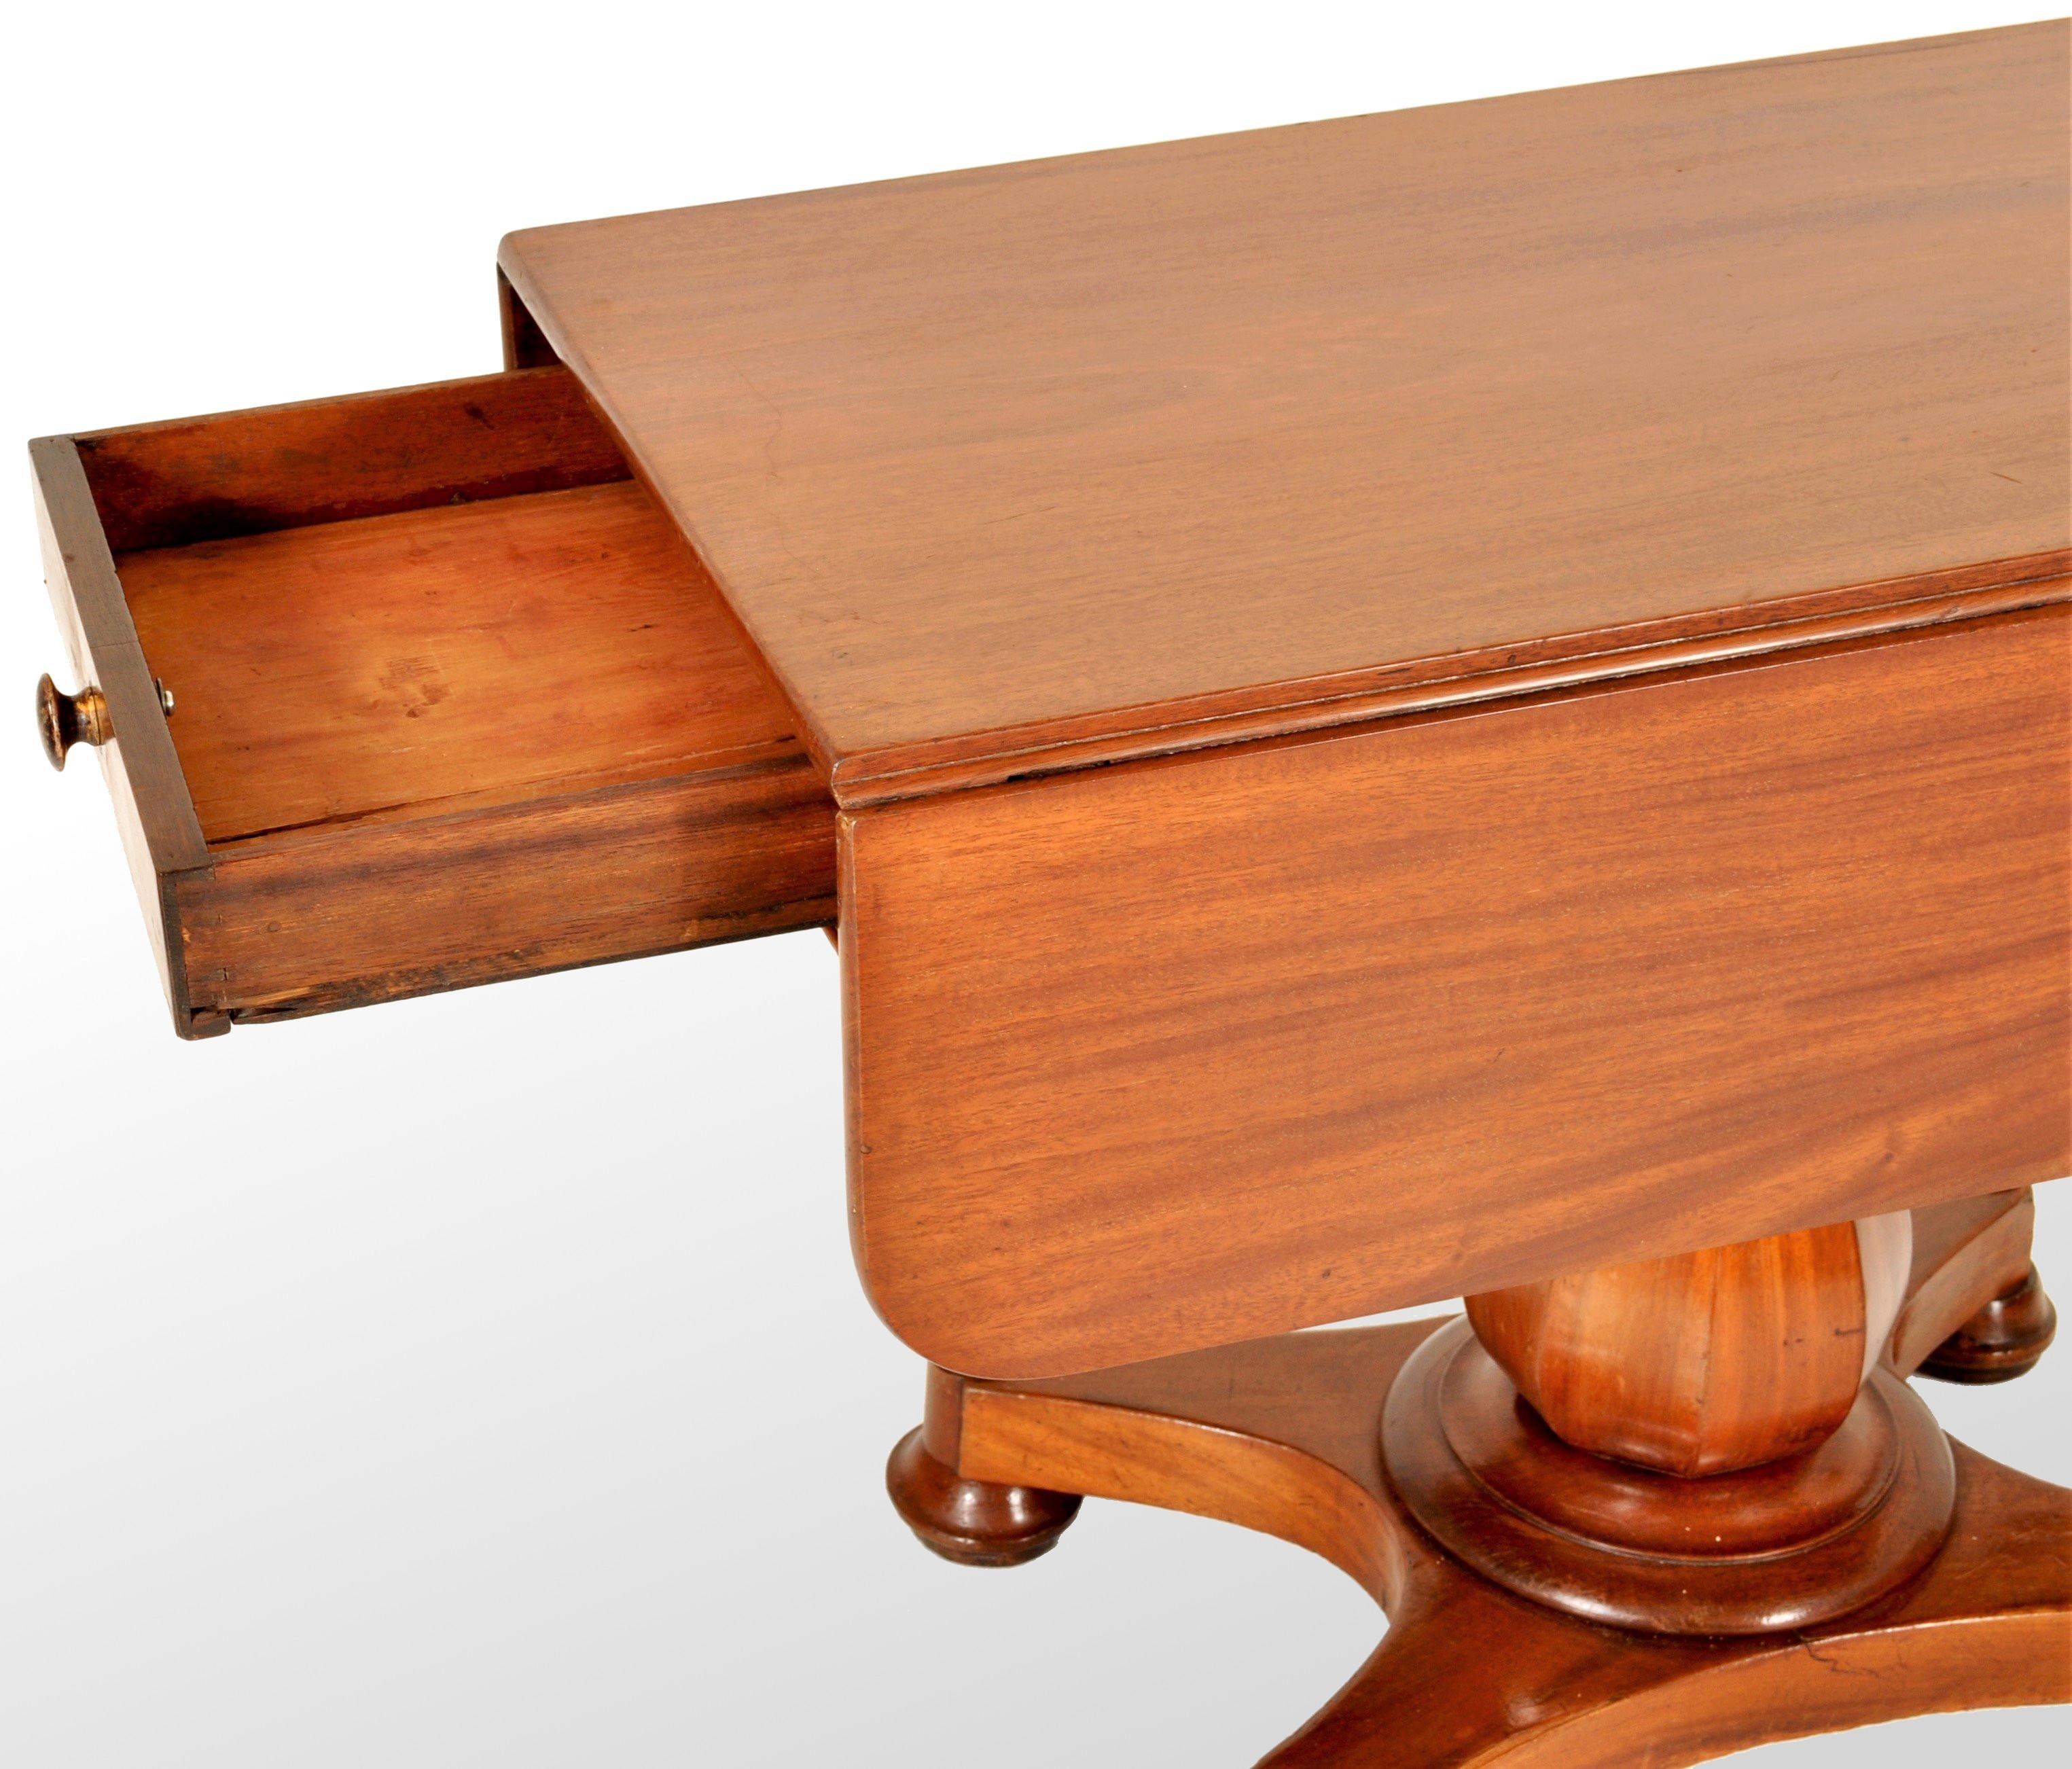 Antique American Classical Mahogany Drop Leaf Pedestal Pembroke Table circa 1840 In Good Condition For Sale In Portland, OR